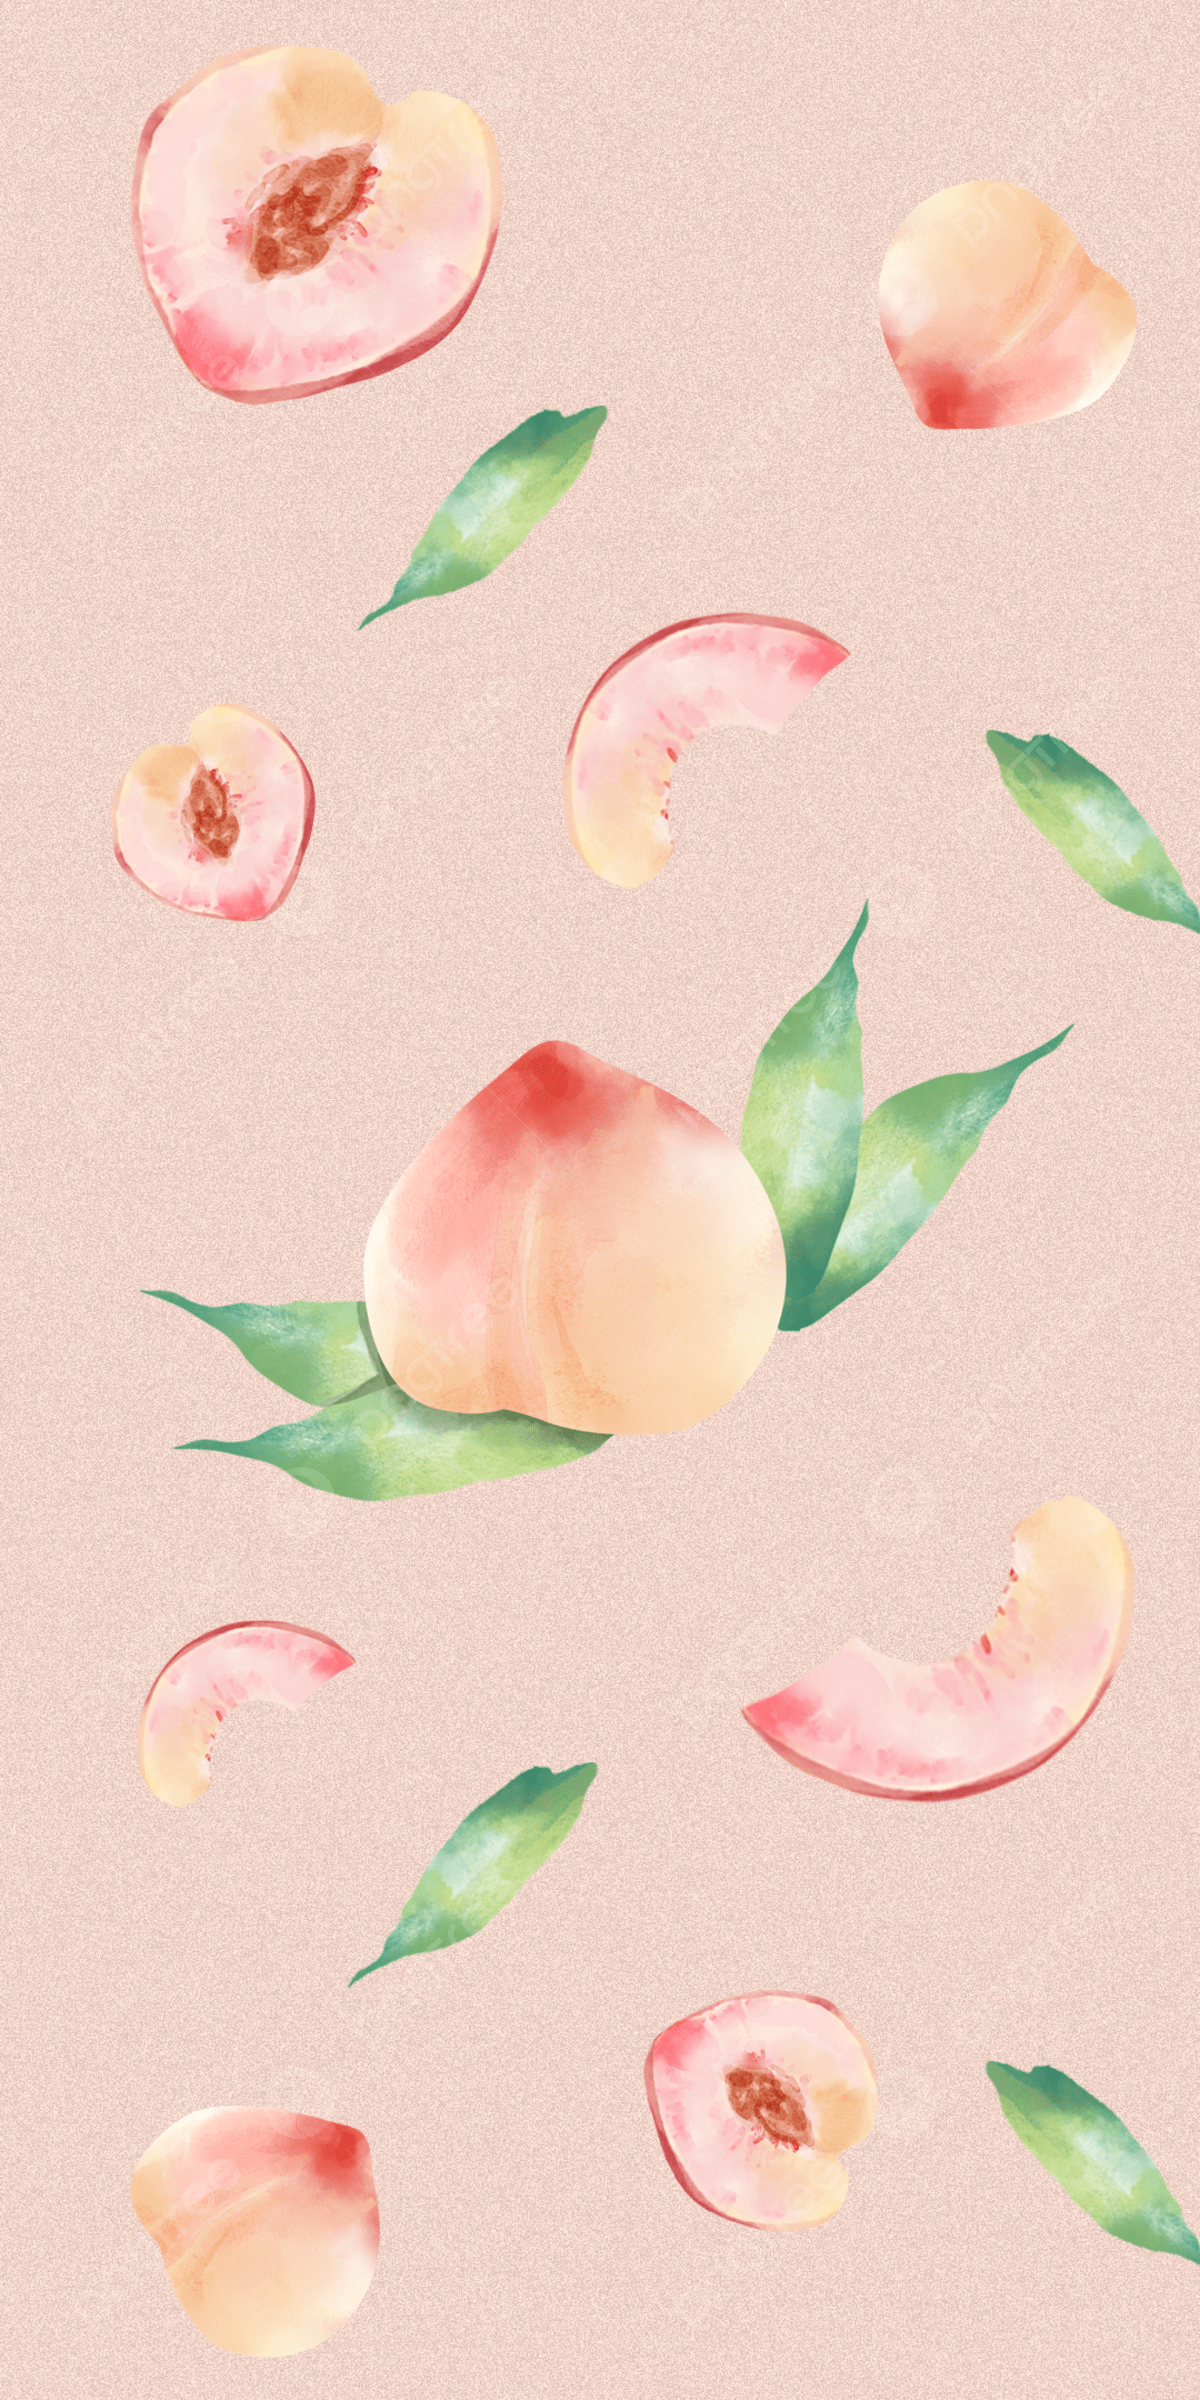 Fruit Wallpaper Watercolor Peach Background Wallpaper Image For Free Download